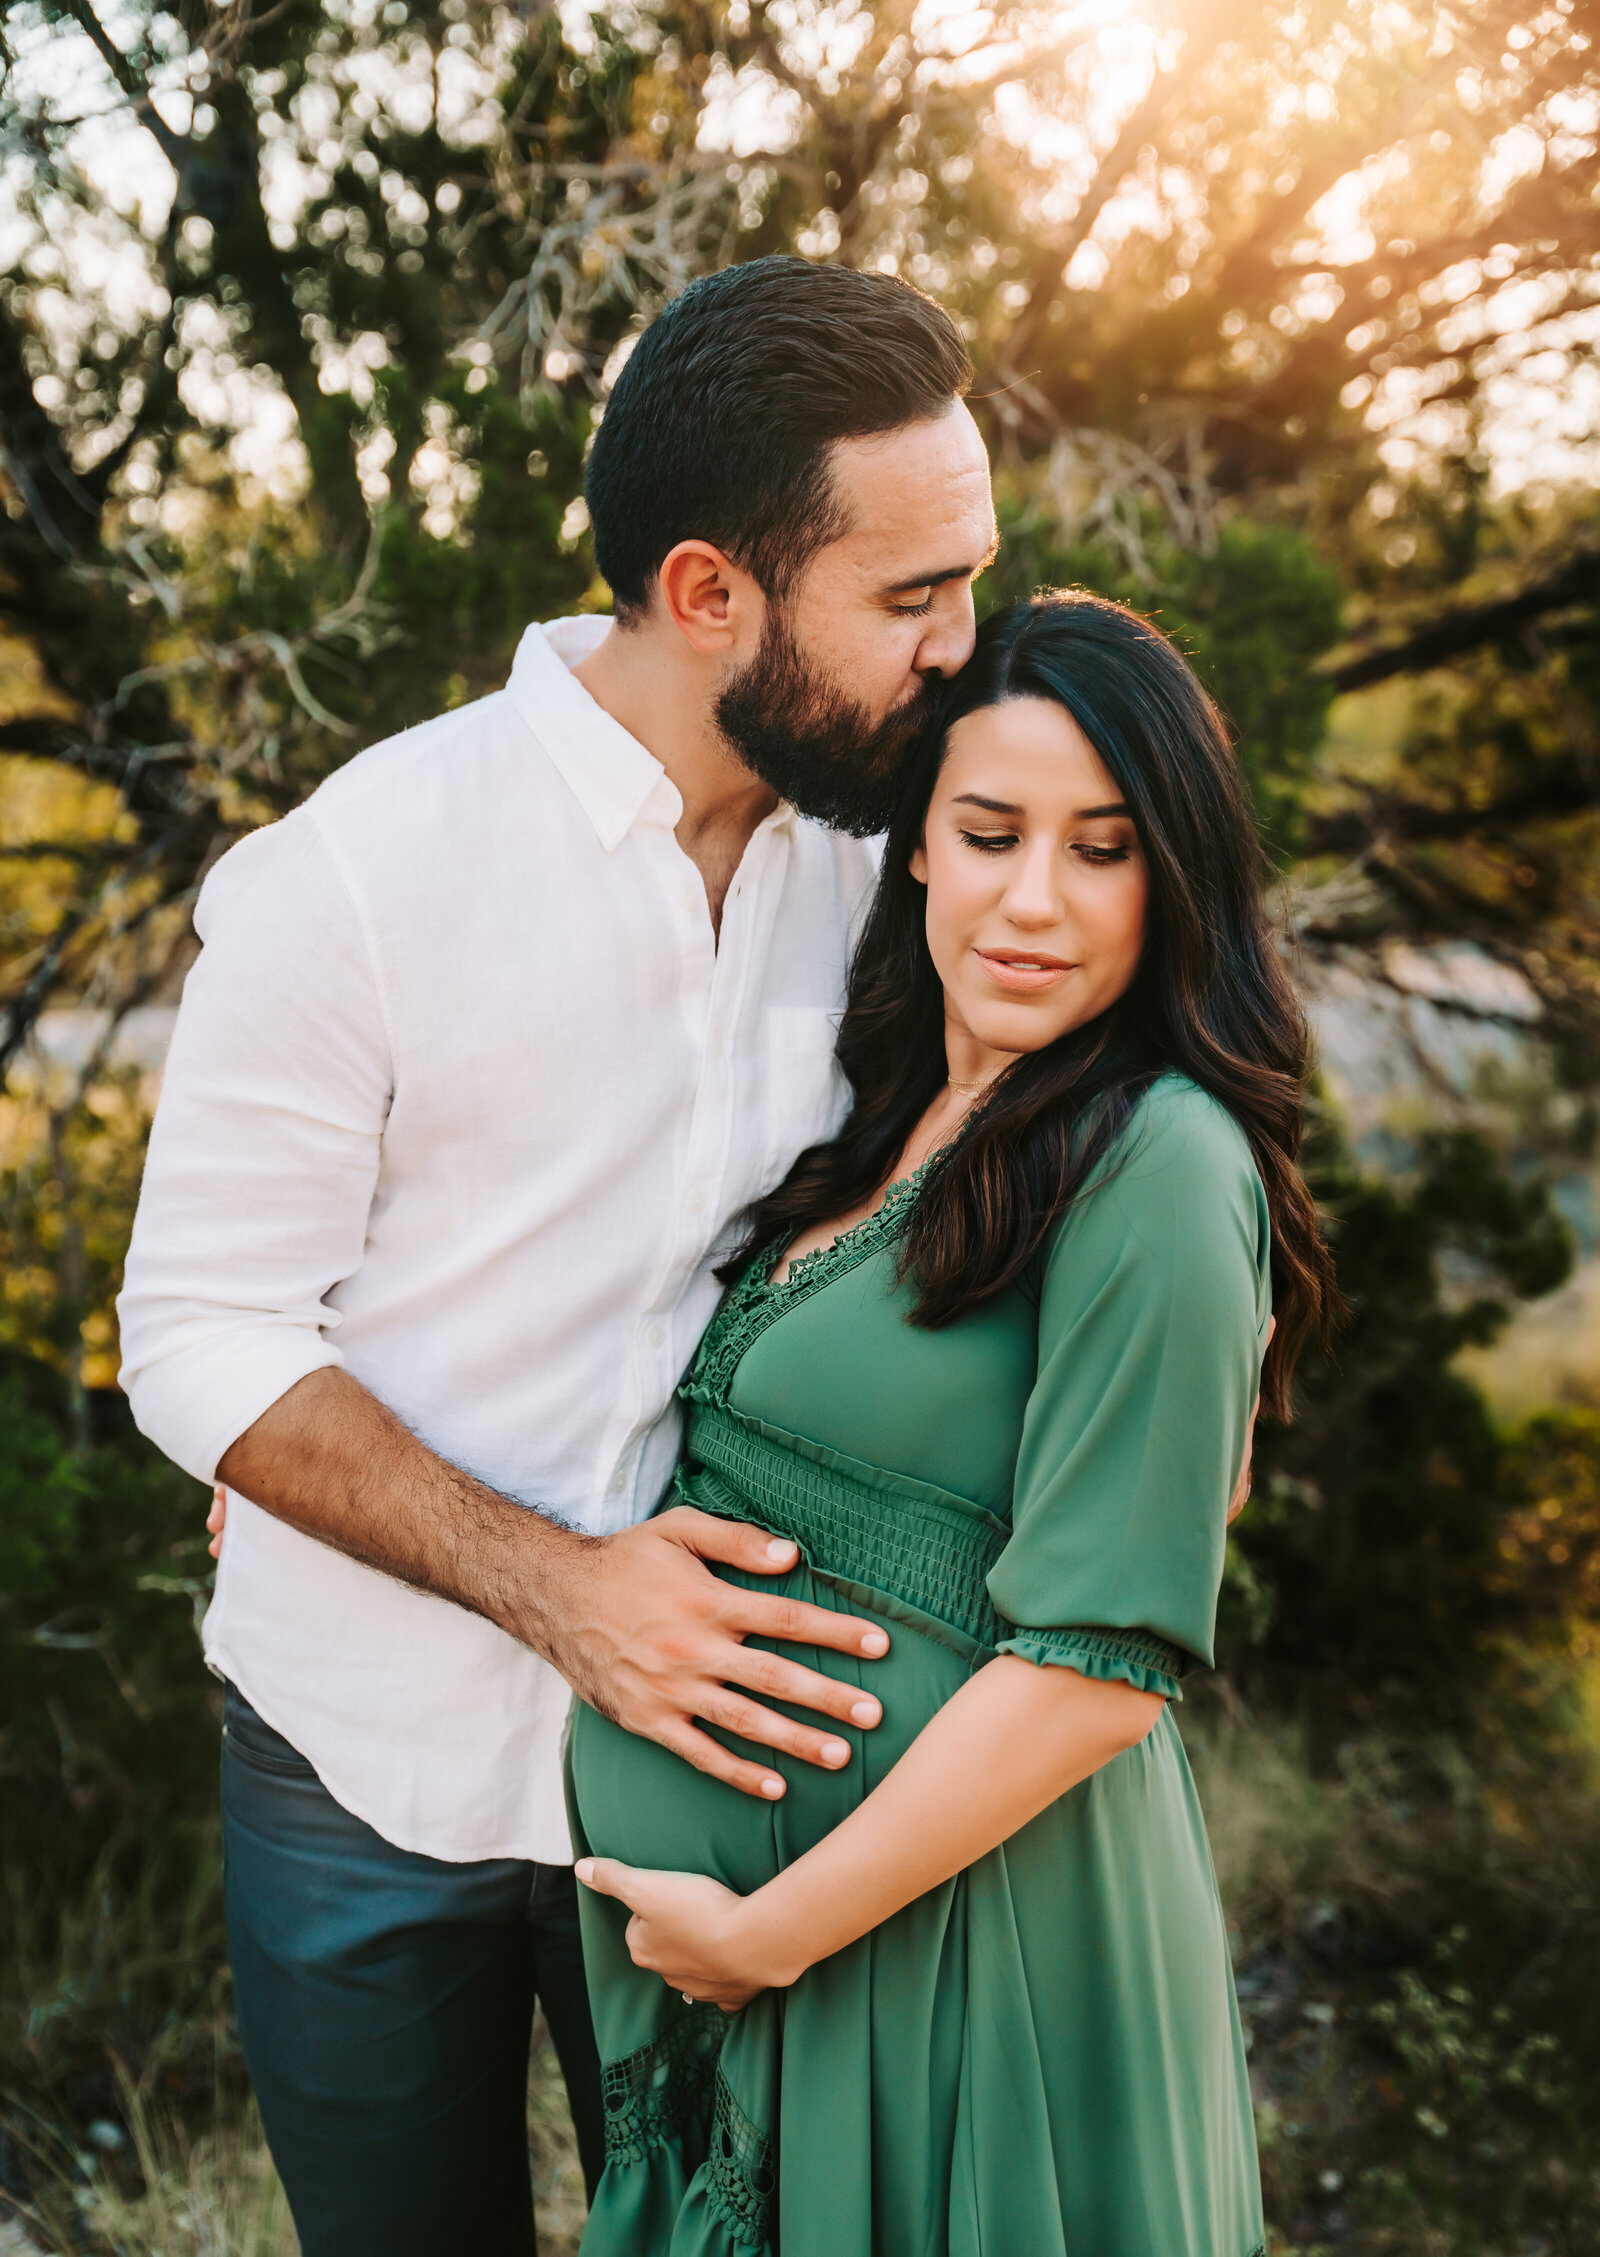 Maternity Photographer, a man and his expectant wife embrace outside